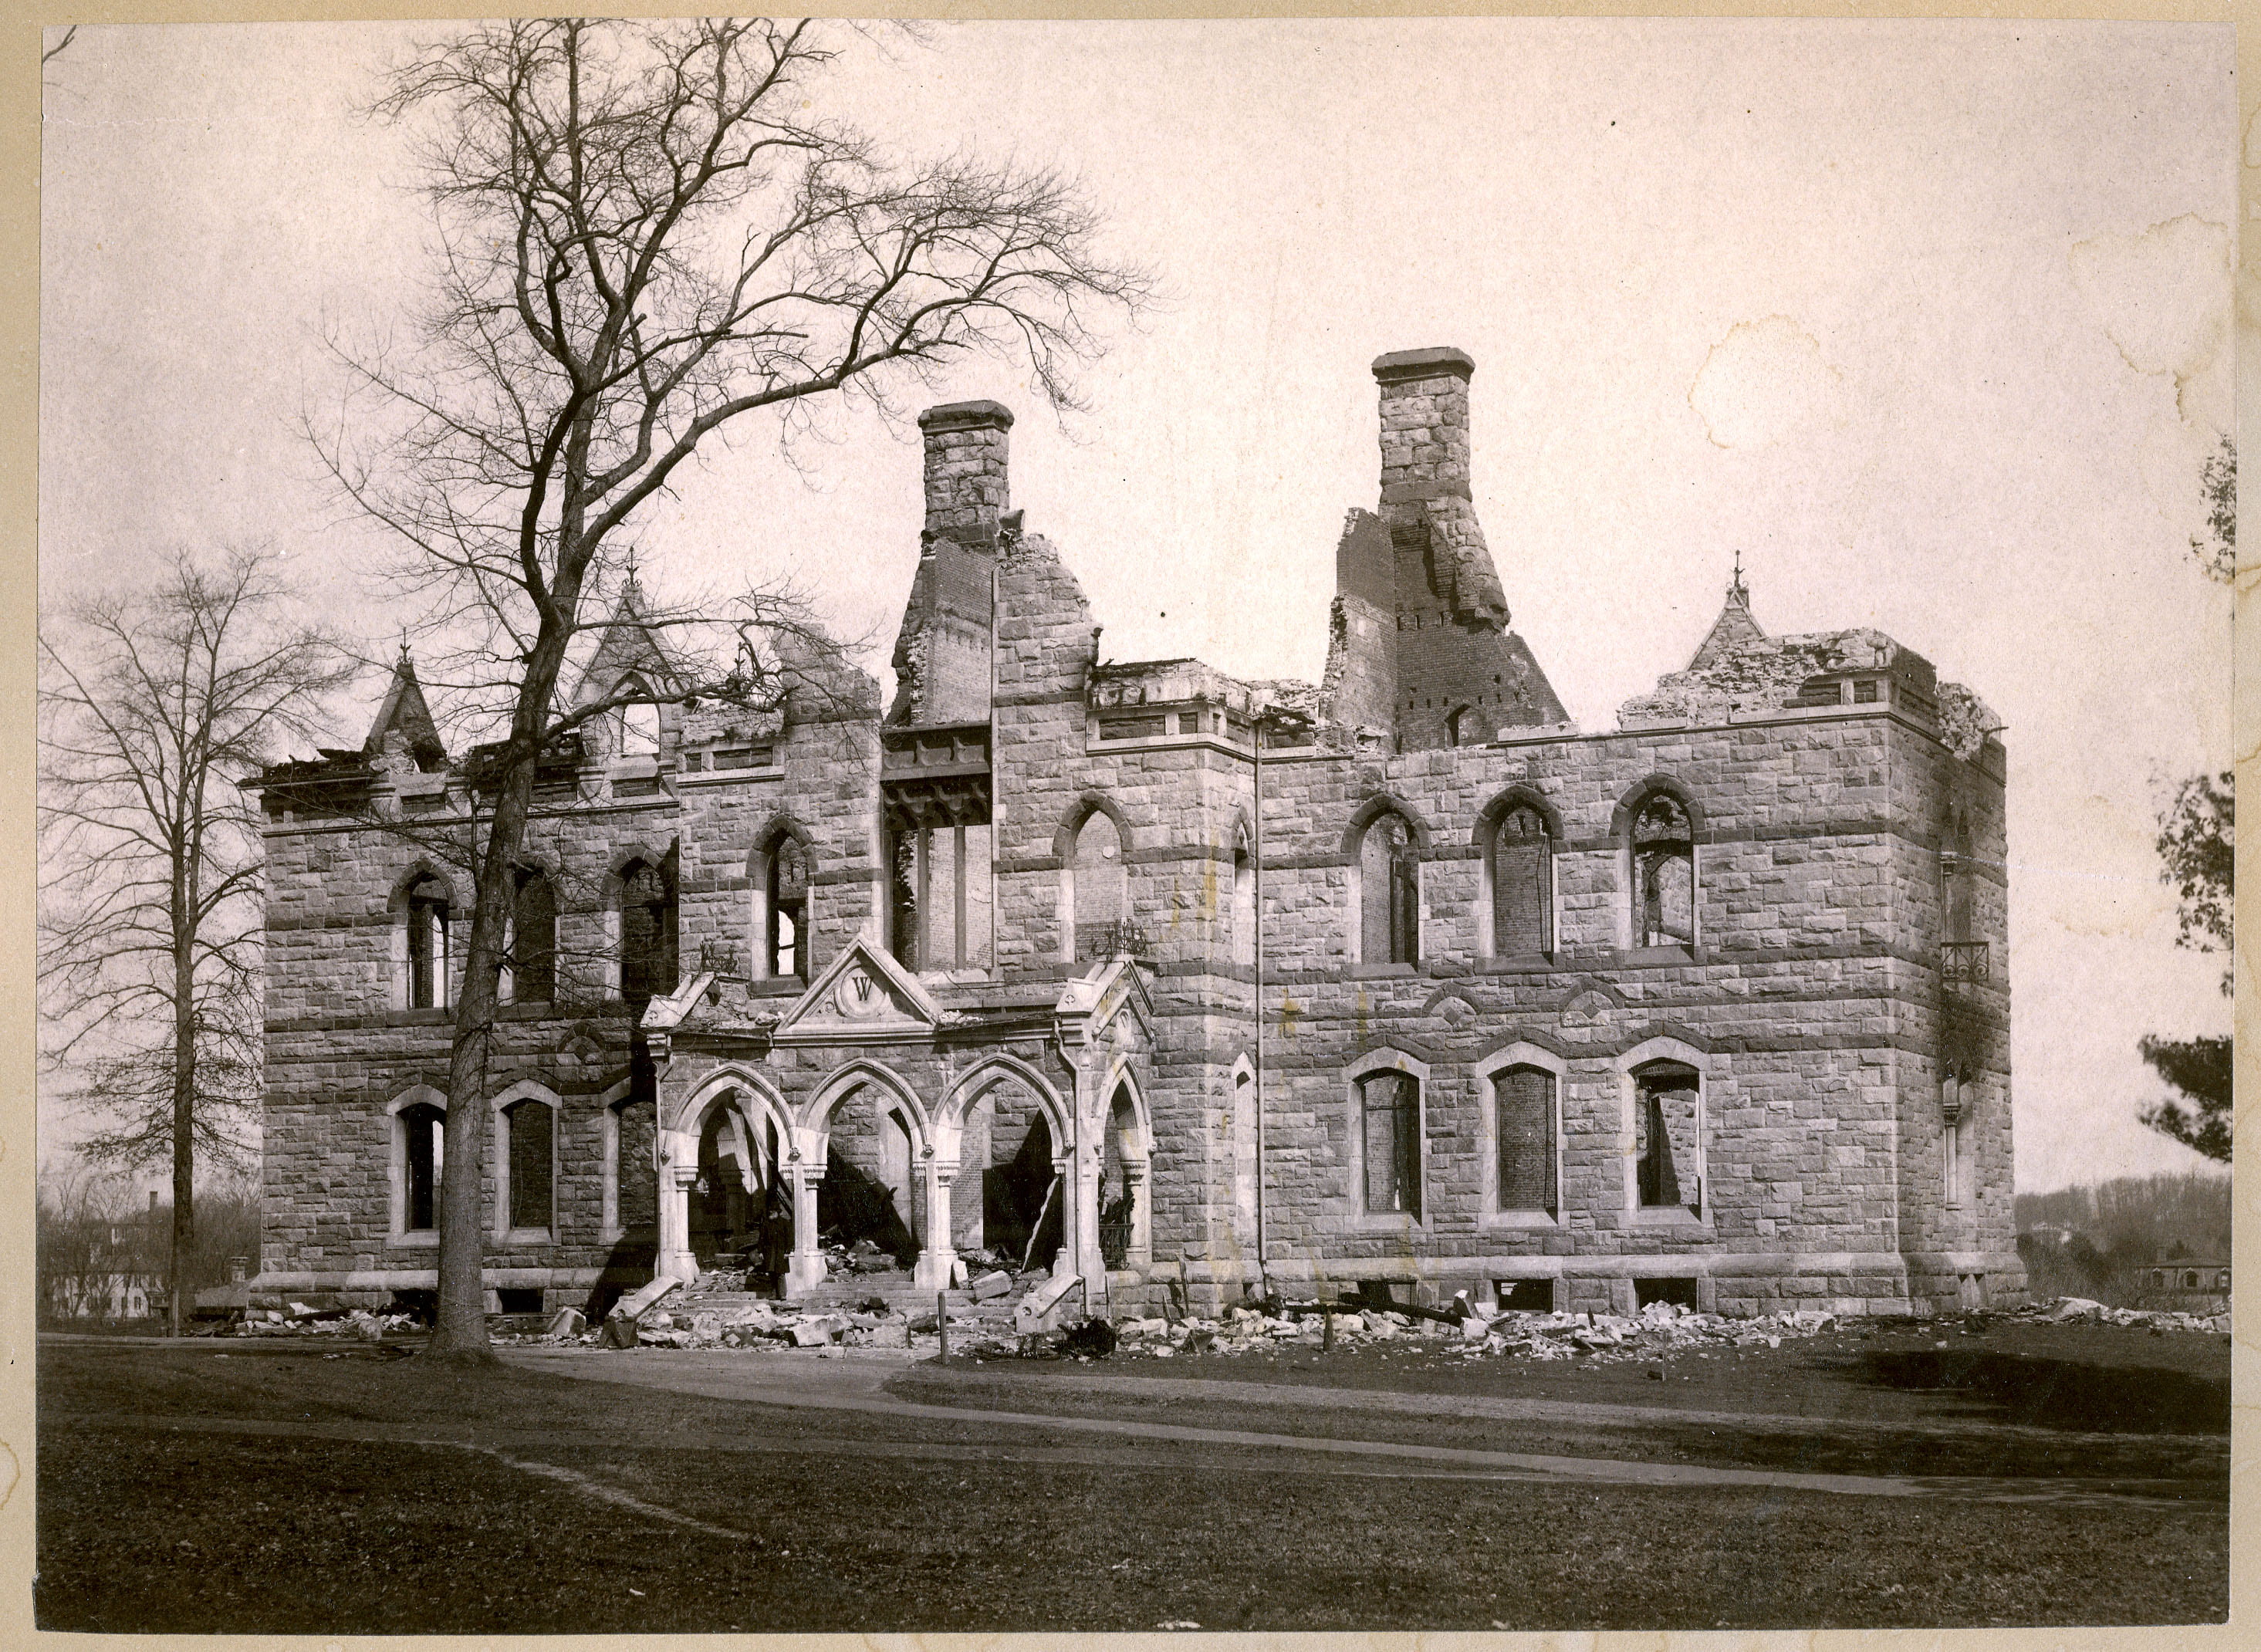 Walker Hall after the fire 1882